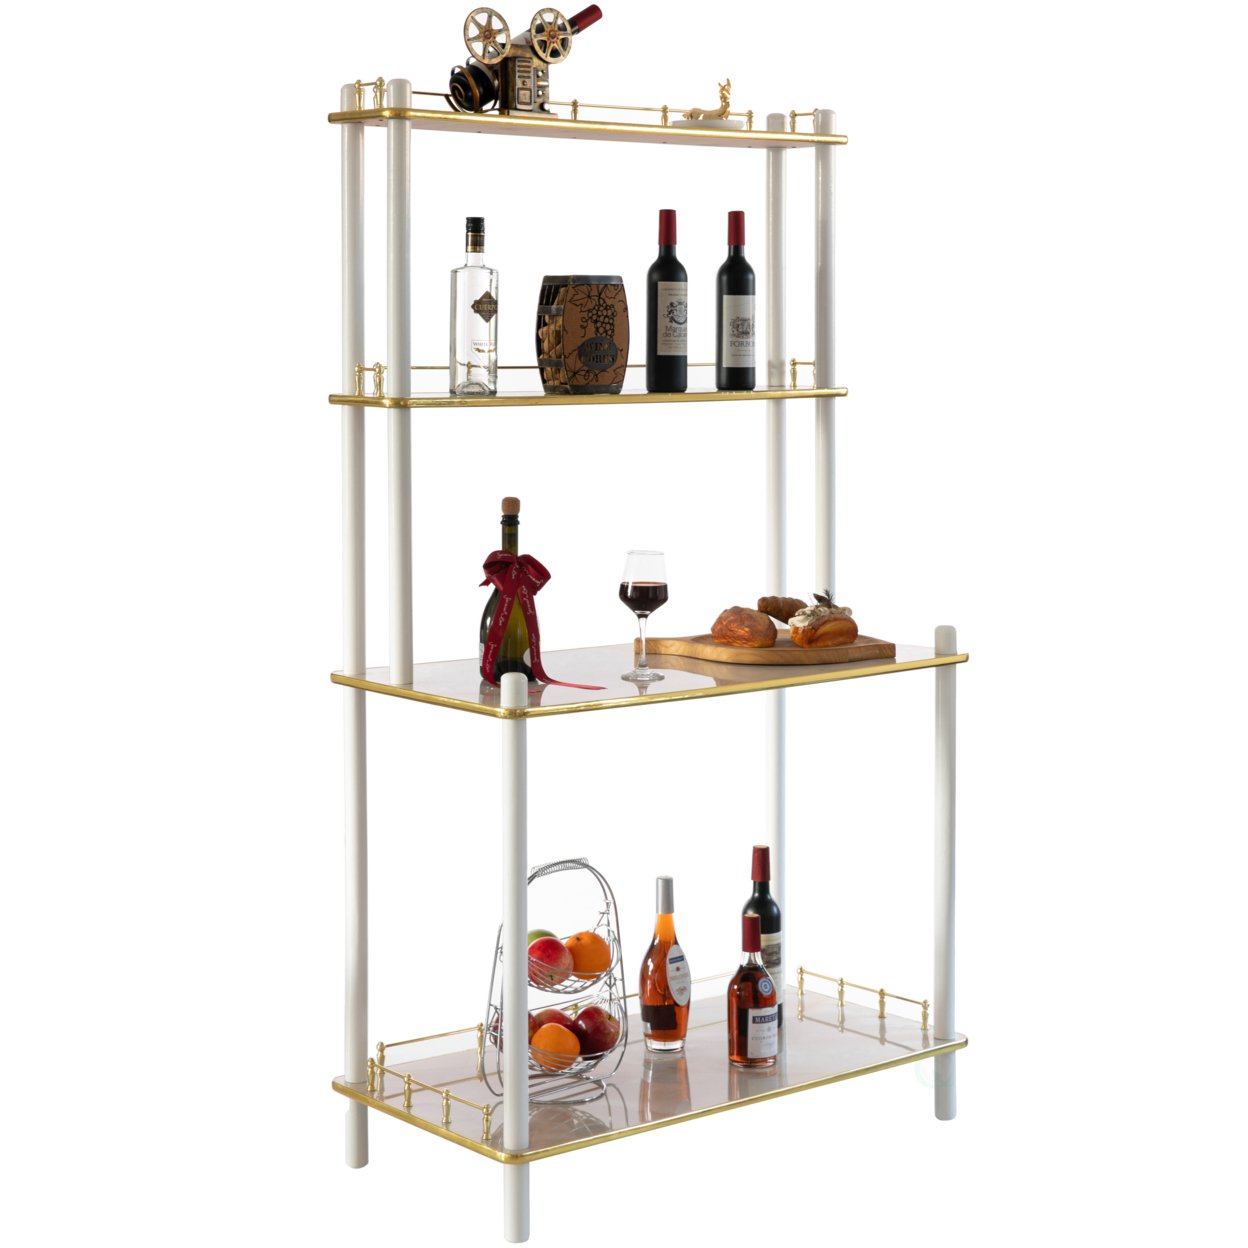 Modern Display Wooden Console Bar Serving Table With 4 Tiered Open Shelves, For Bartender, Kitchen Or Wine Caller Room - White